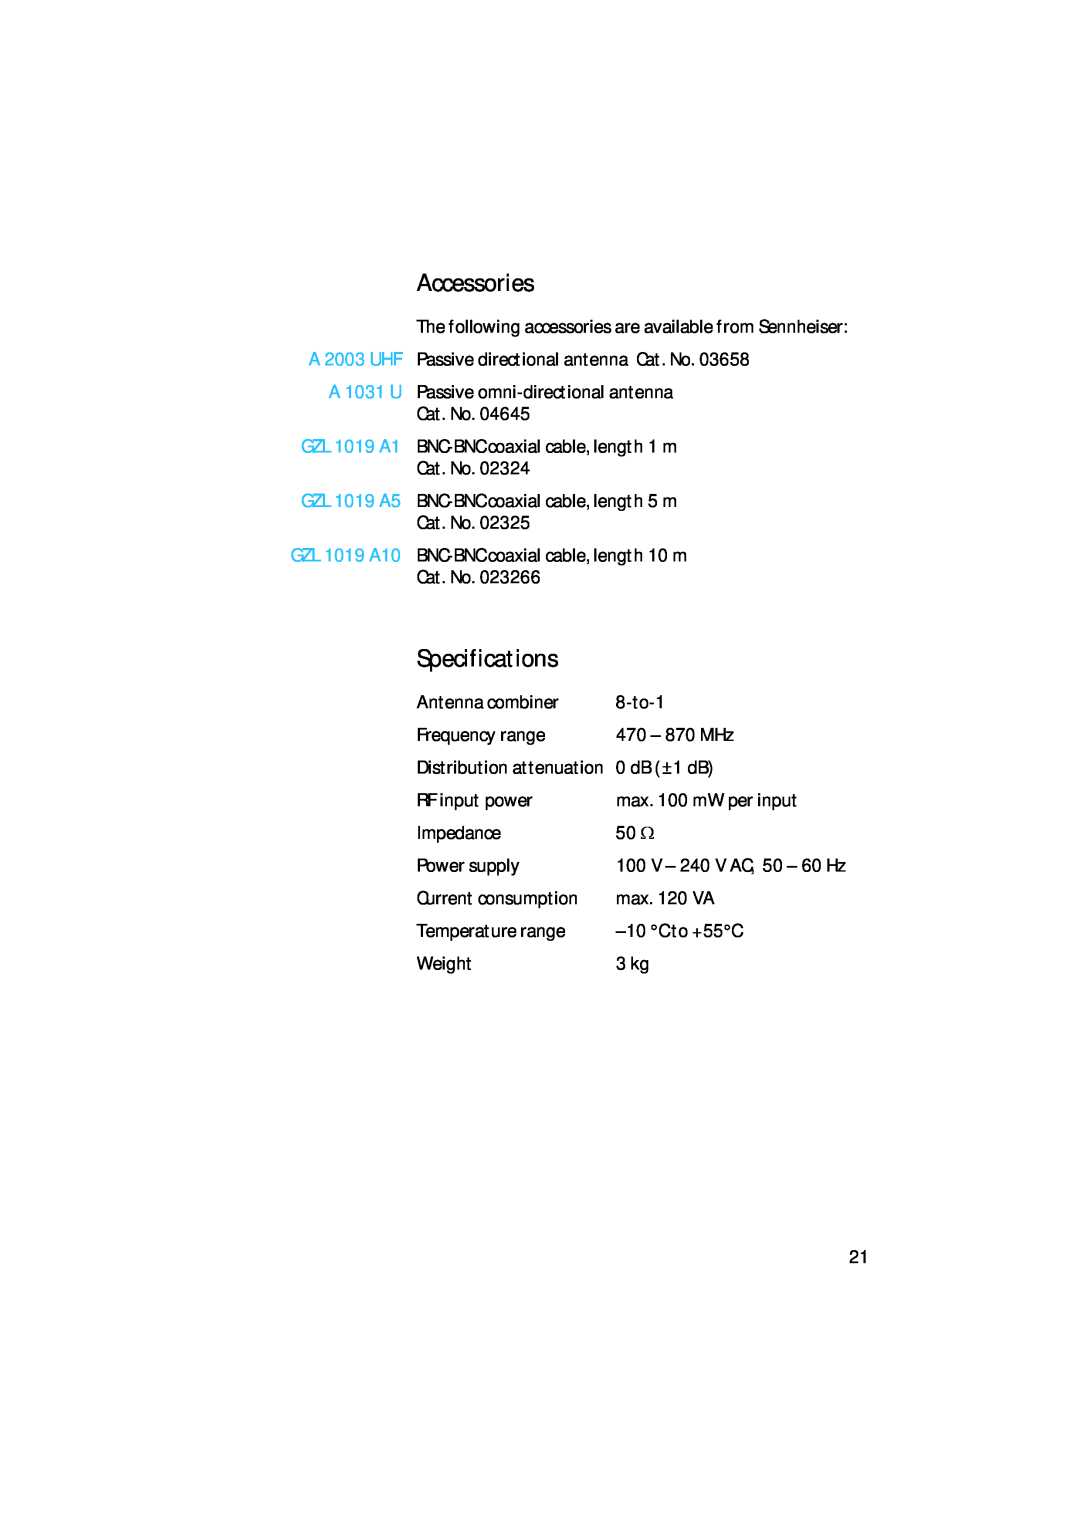 Sennheiser AC 3000 manual Accessories, Specifications 